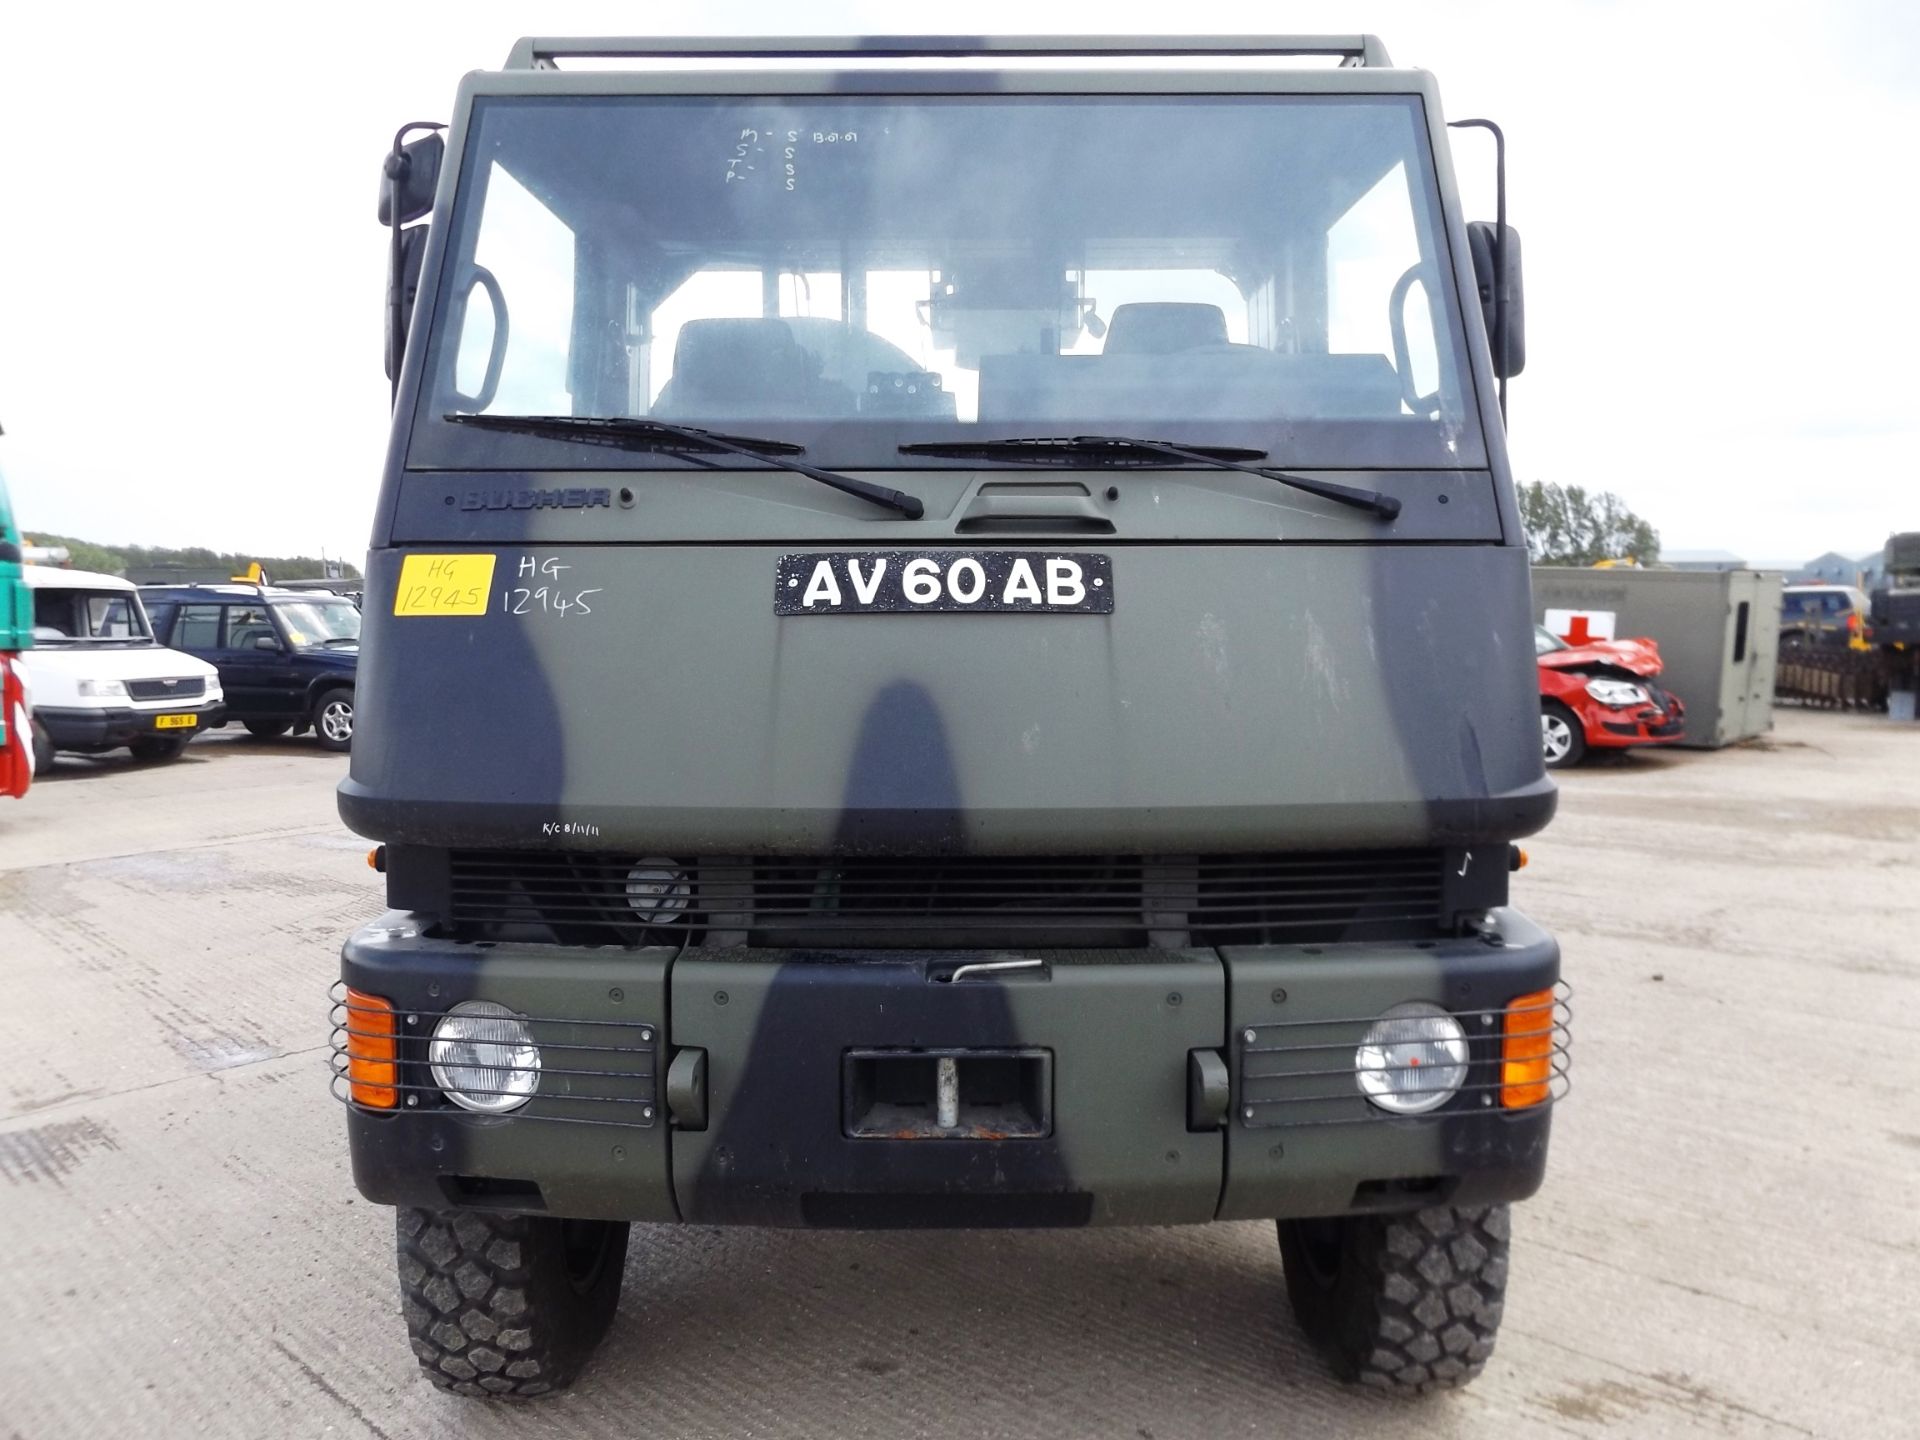 Ex Reserve Left Hand Drive Mowag Bucher Duro II 6x6 High-Mobility Tactical Vehicle - Image 2 of 18